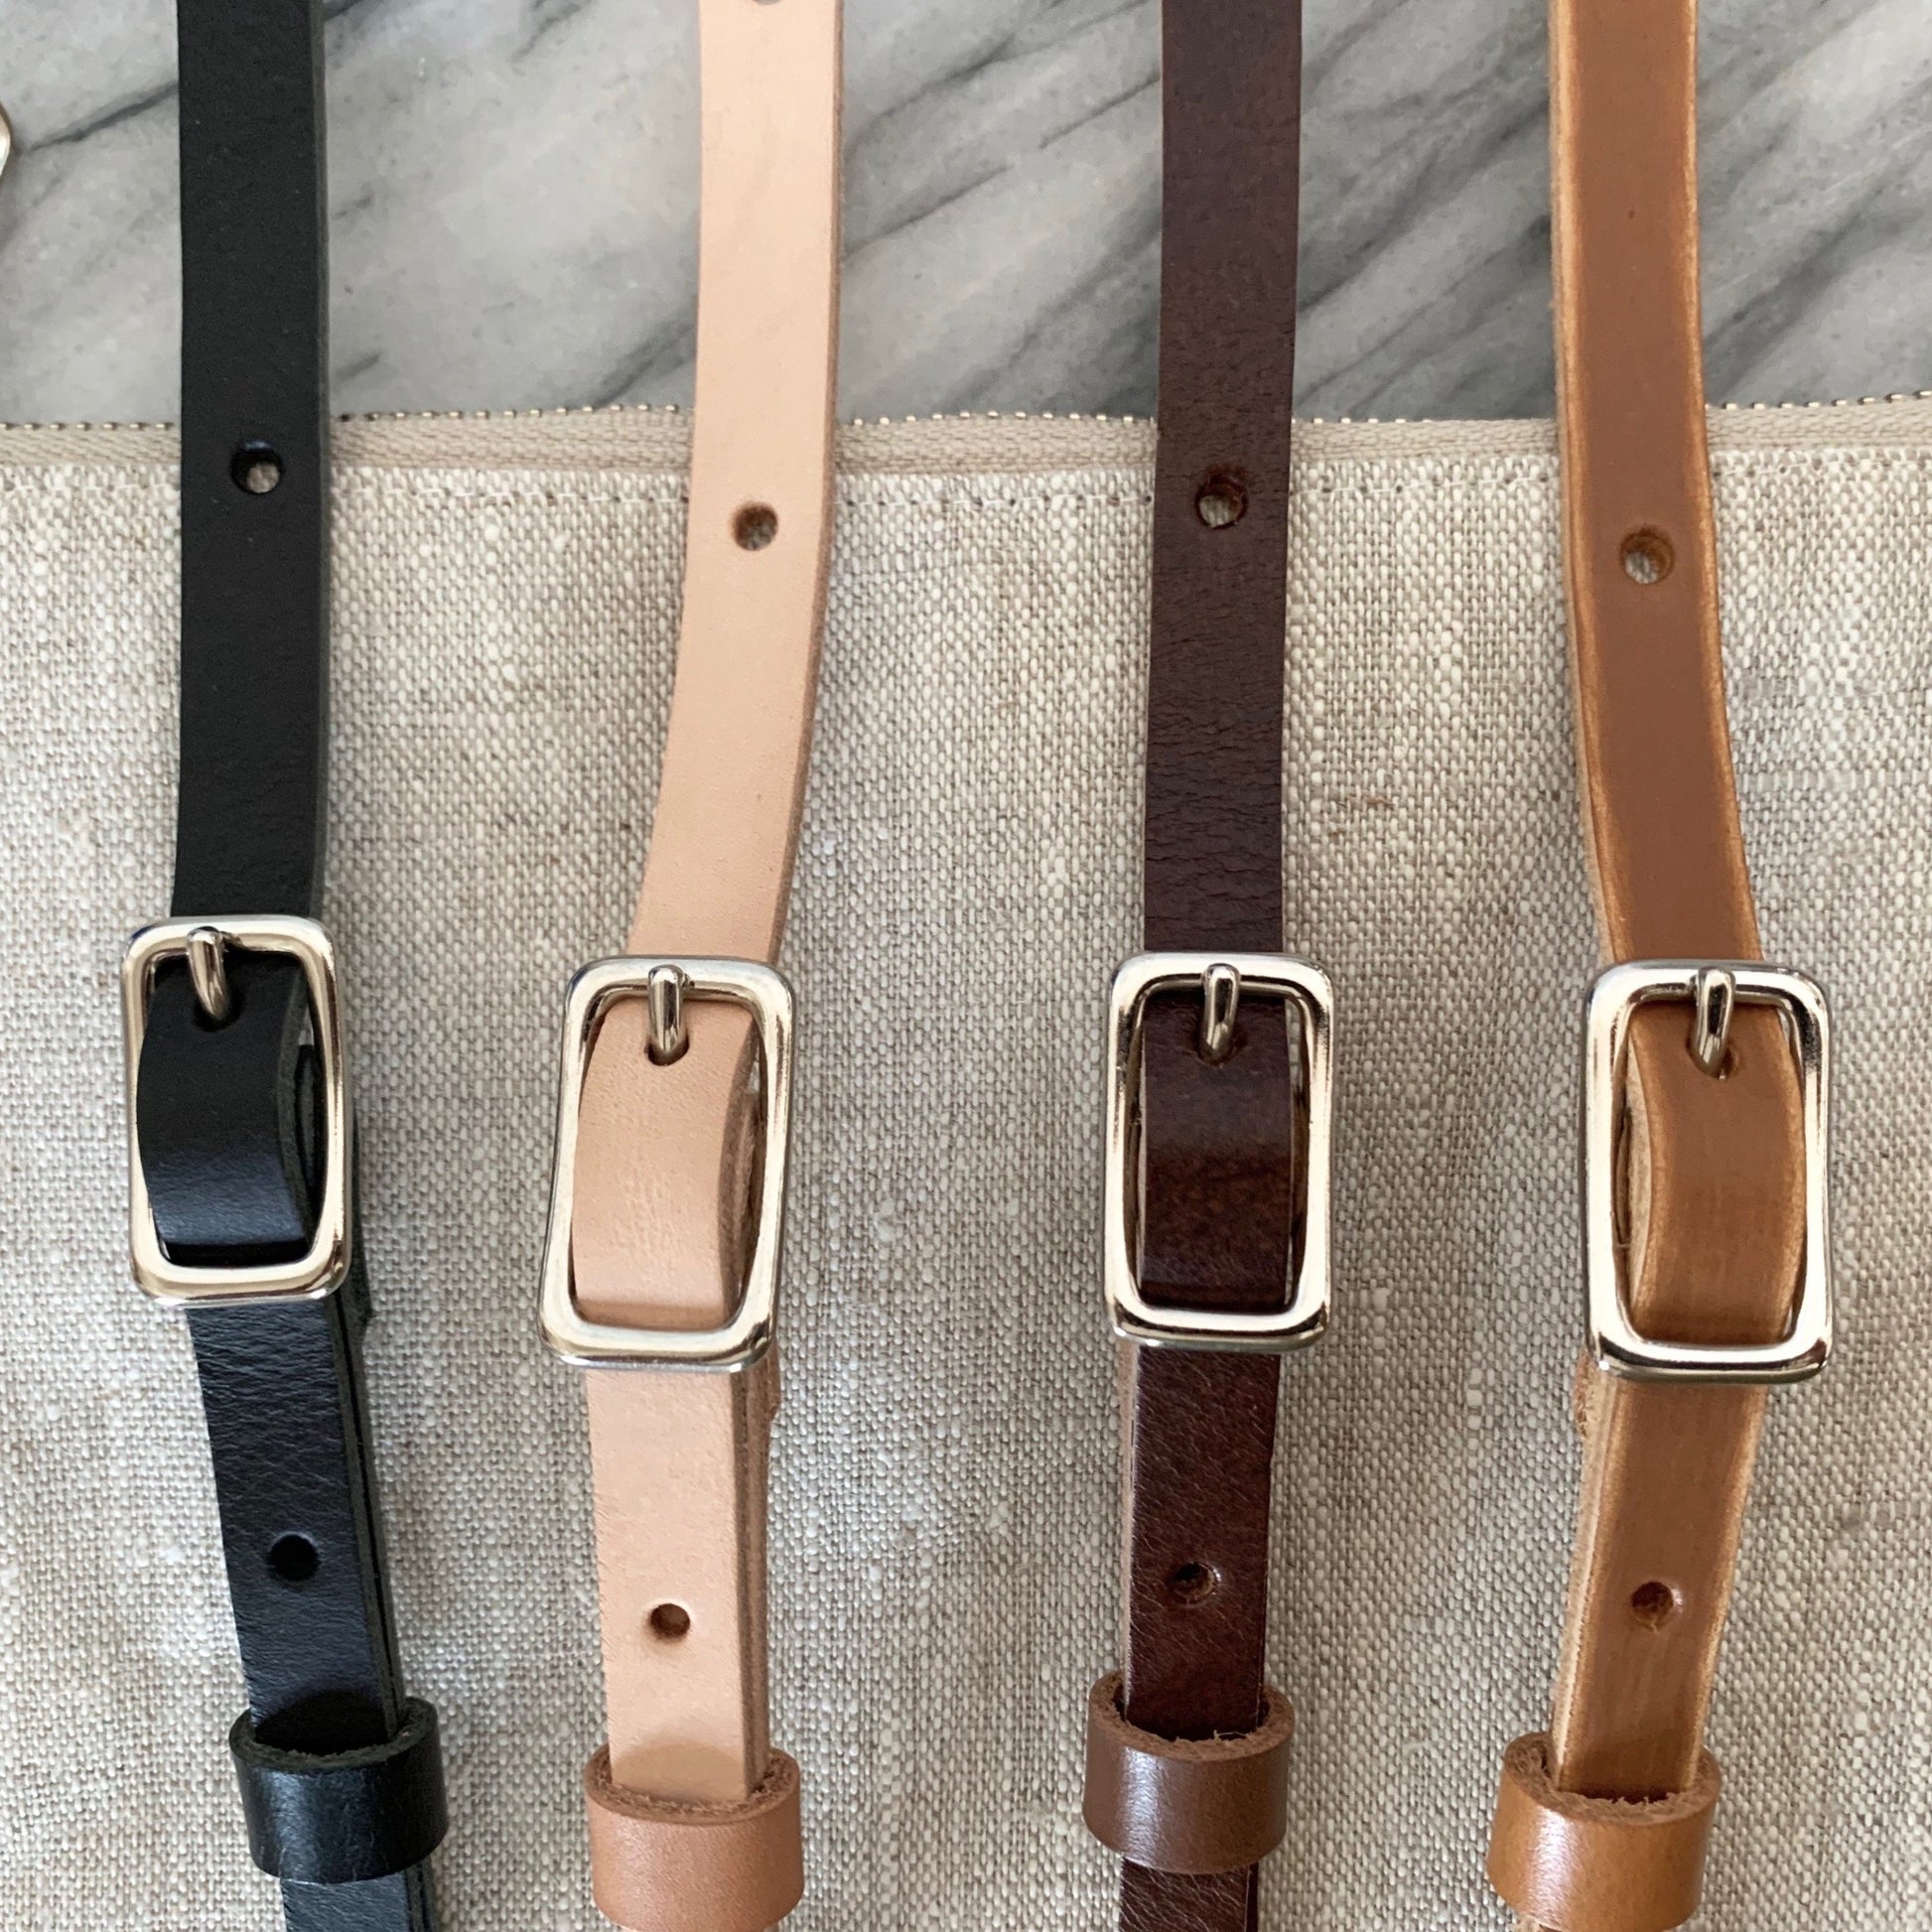 Leather Straps for Handbags and Crossbody Bags – Independent Reign